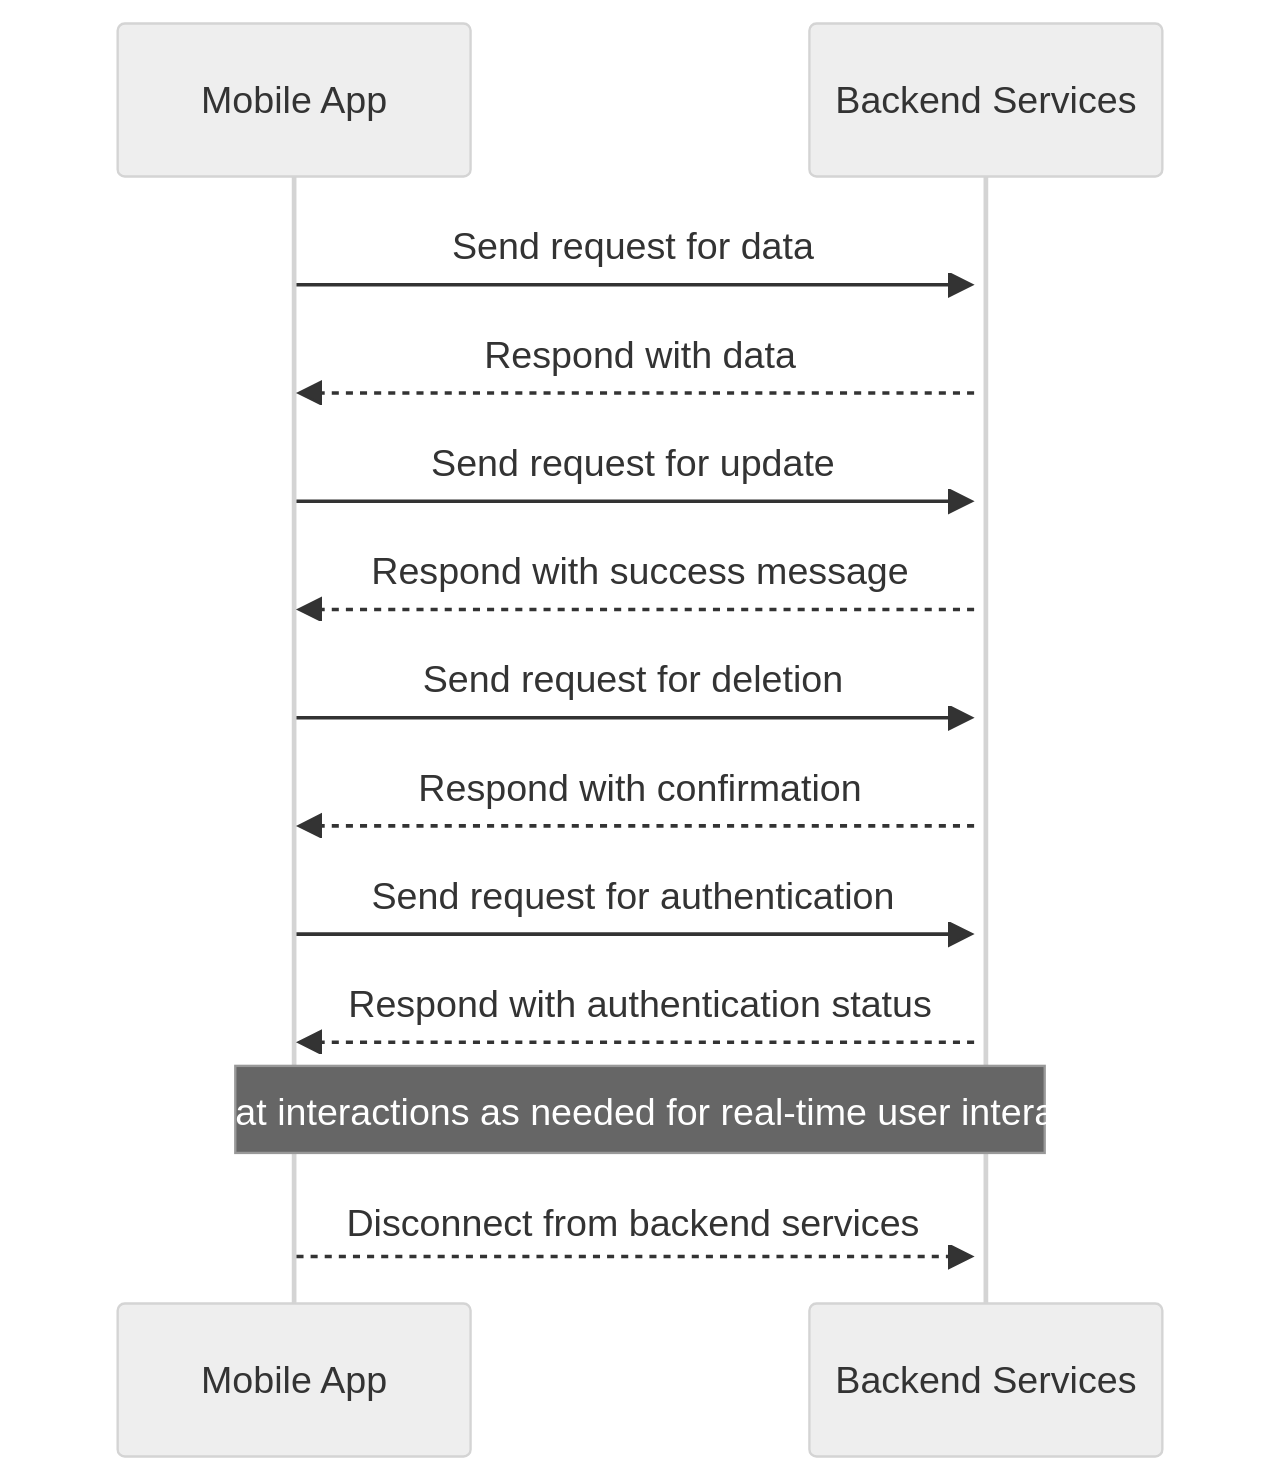 Interaction between Backend Services and Mobile App